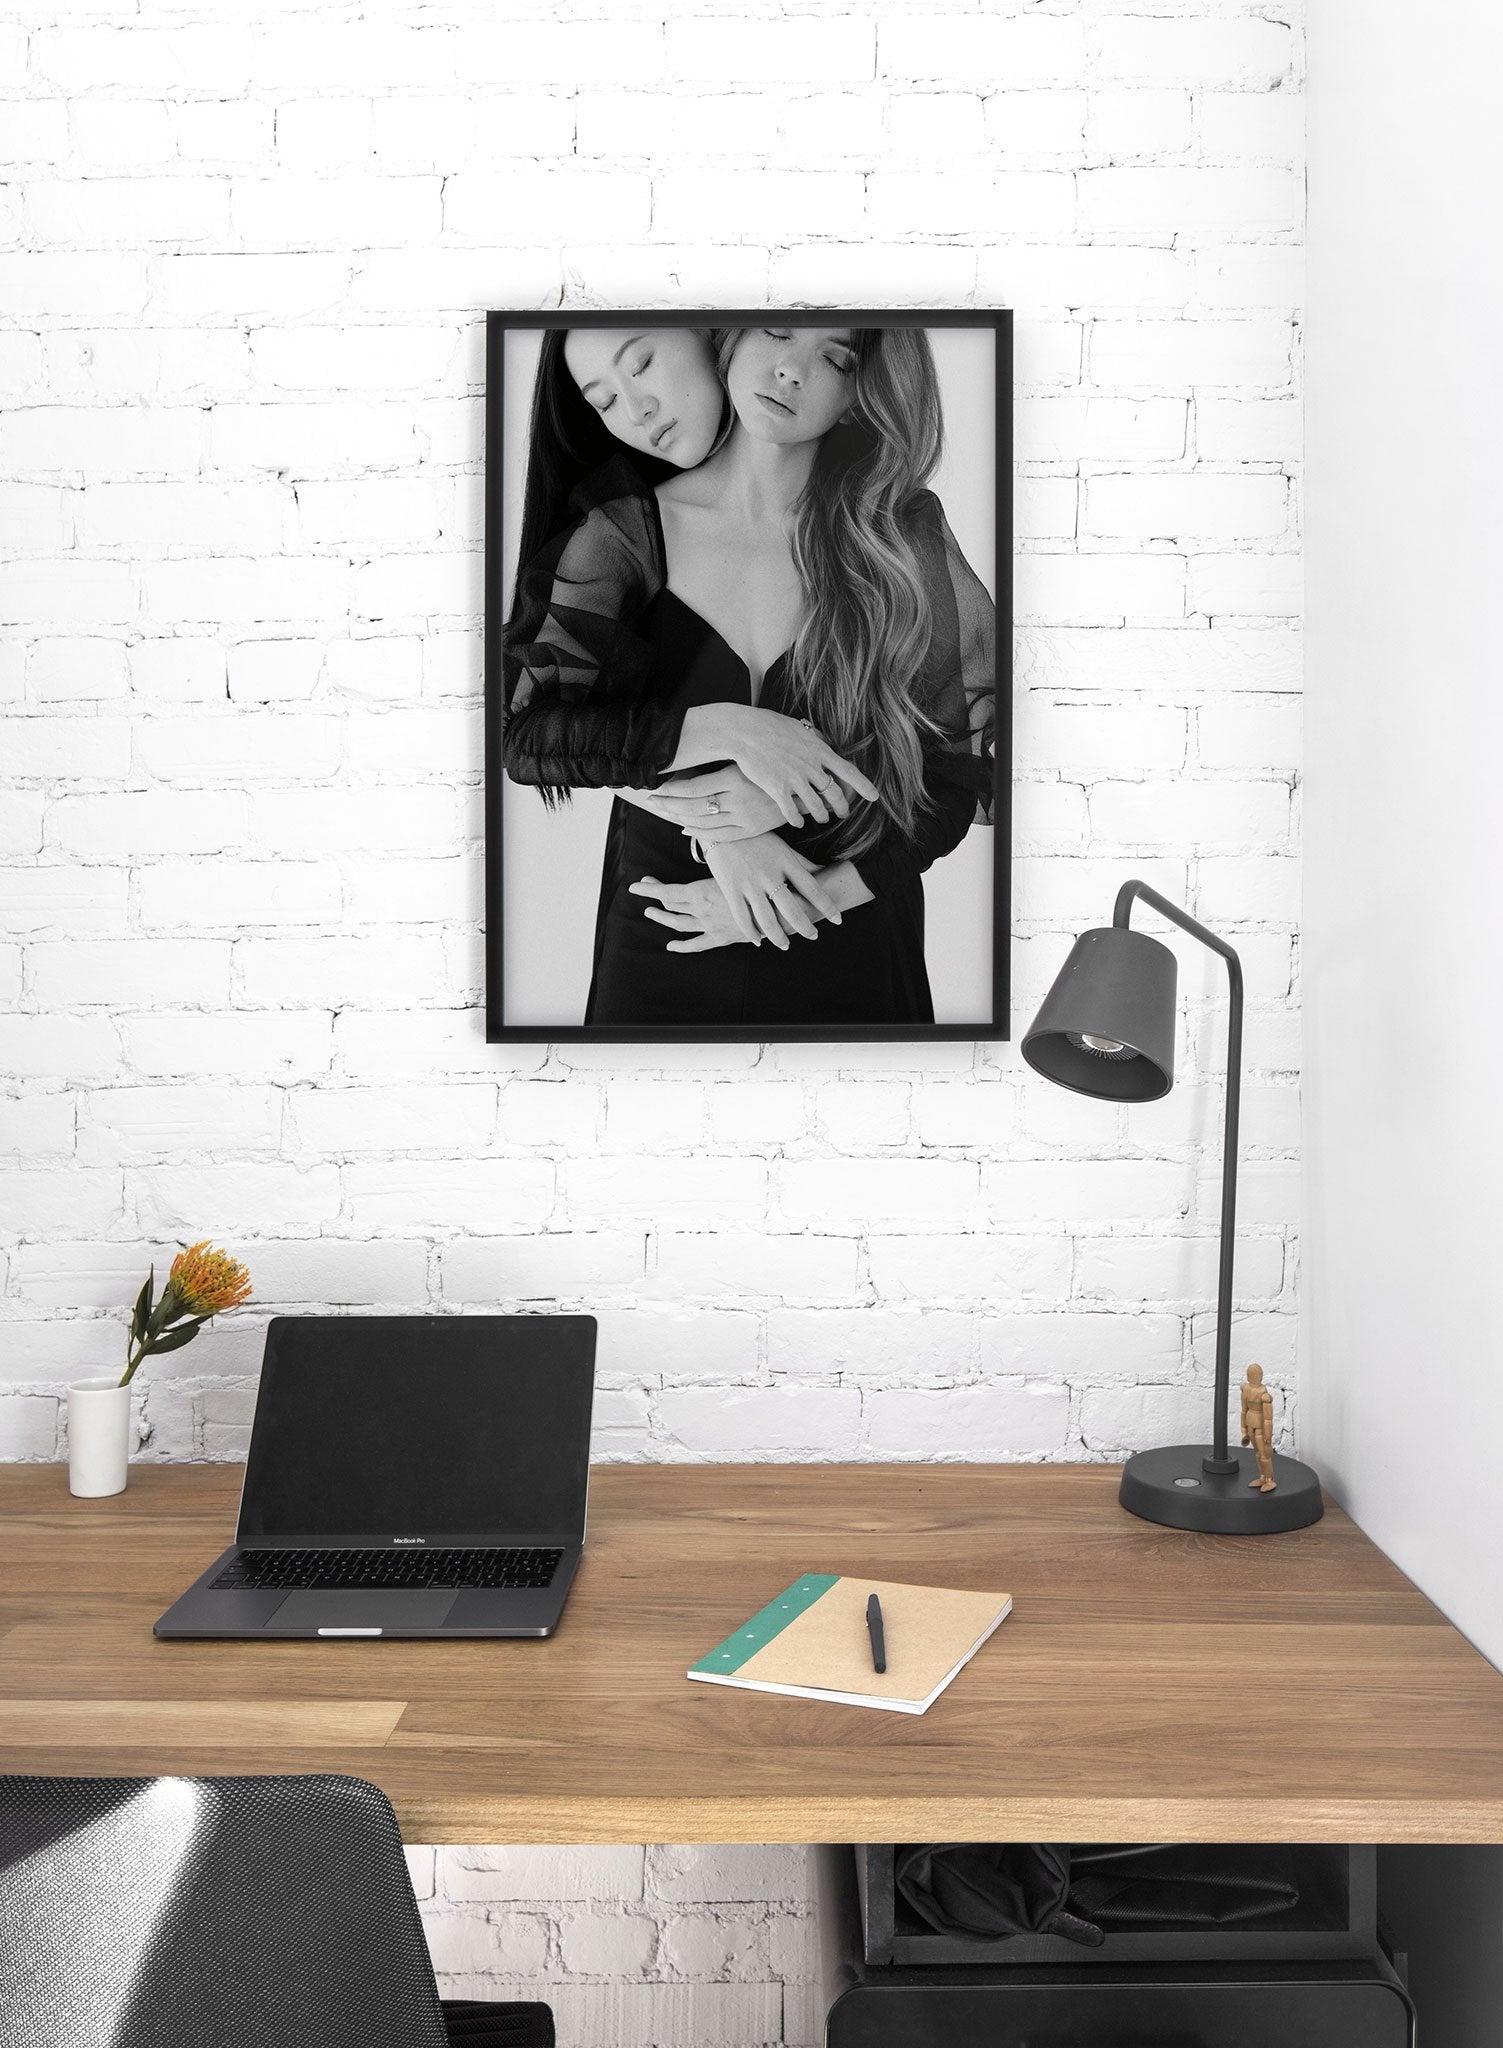 Black and white fashion photography poster by Opposite Wall with women embracing - Lifestyle - Office Desk